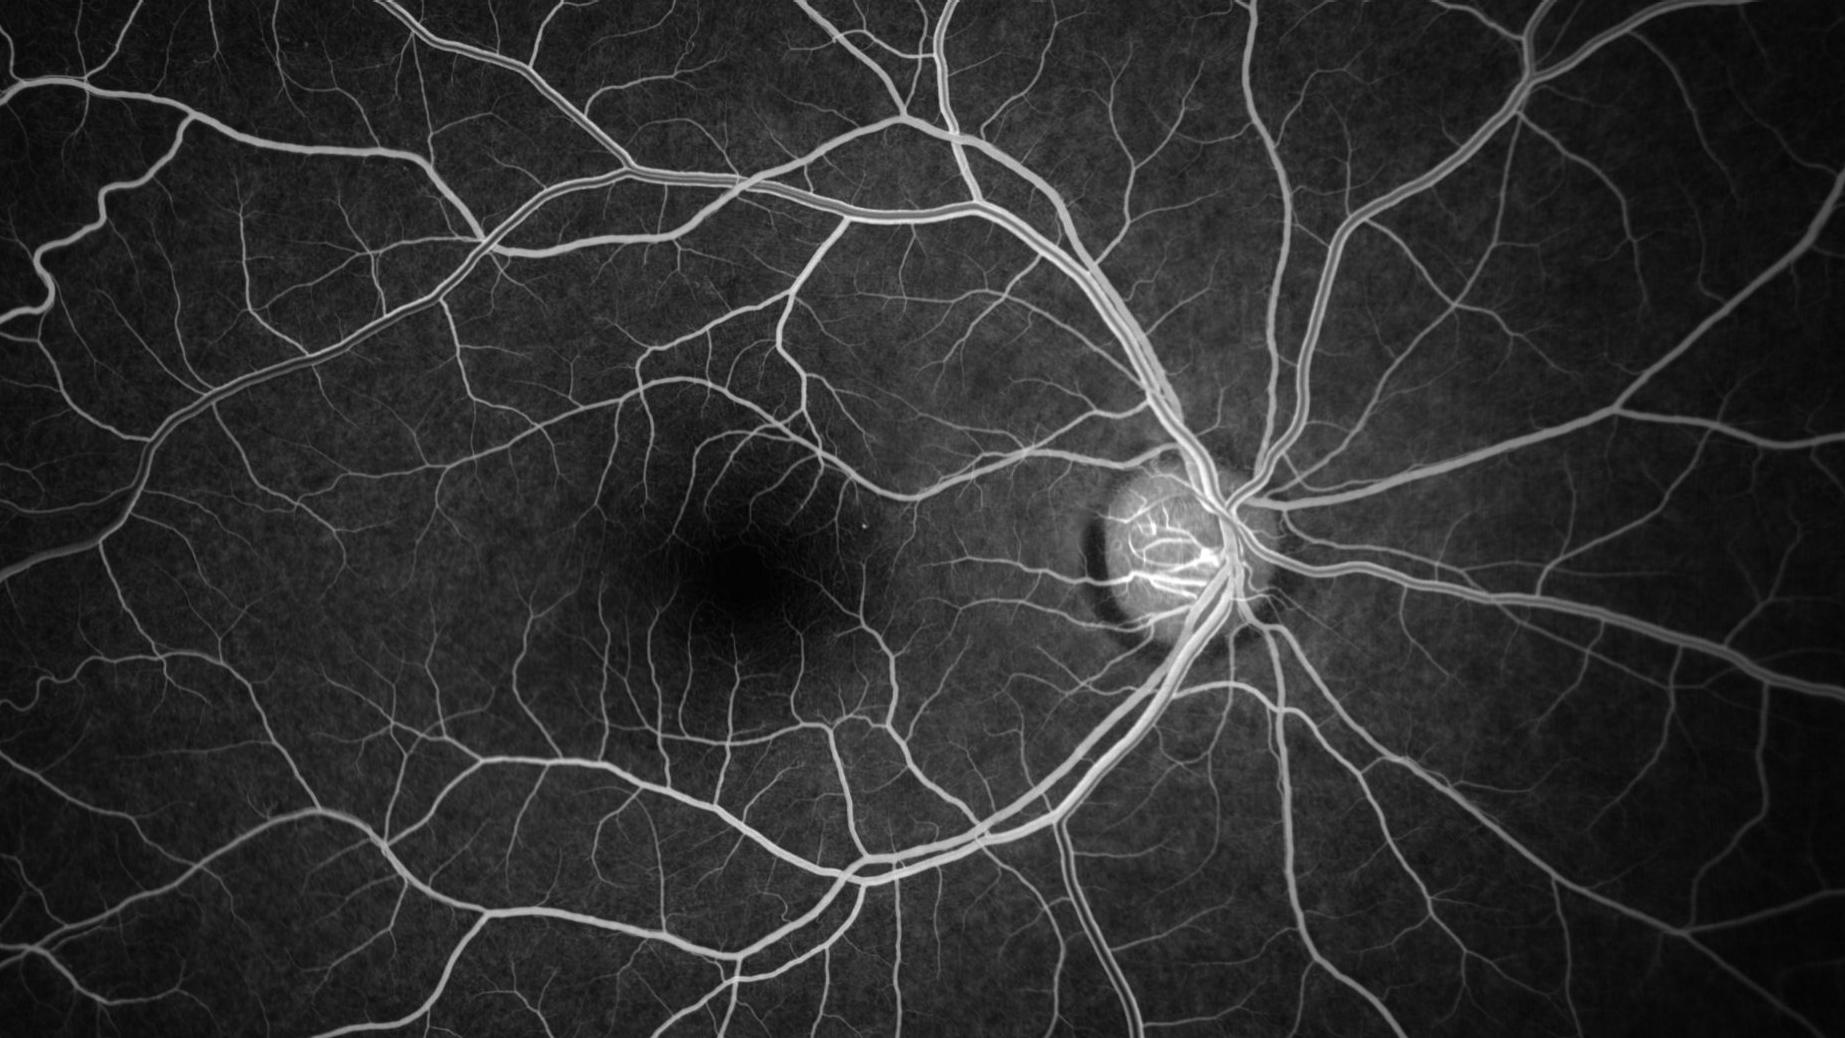 Sickle Cell Retinopathy Case 9 [38-yr old male]